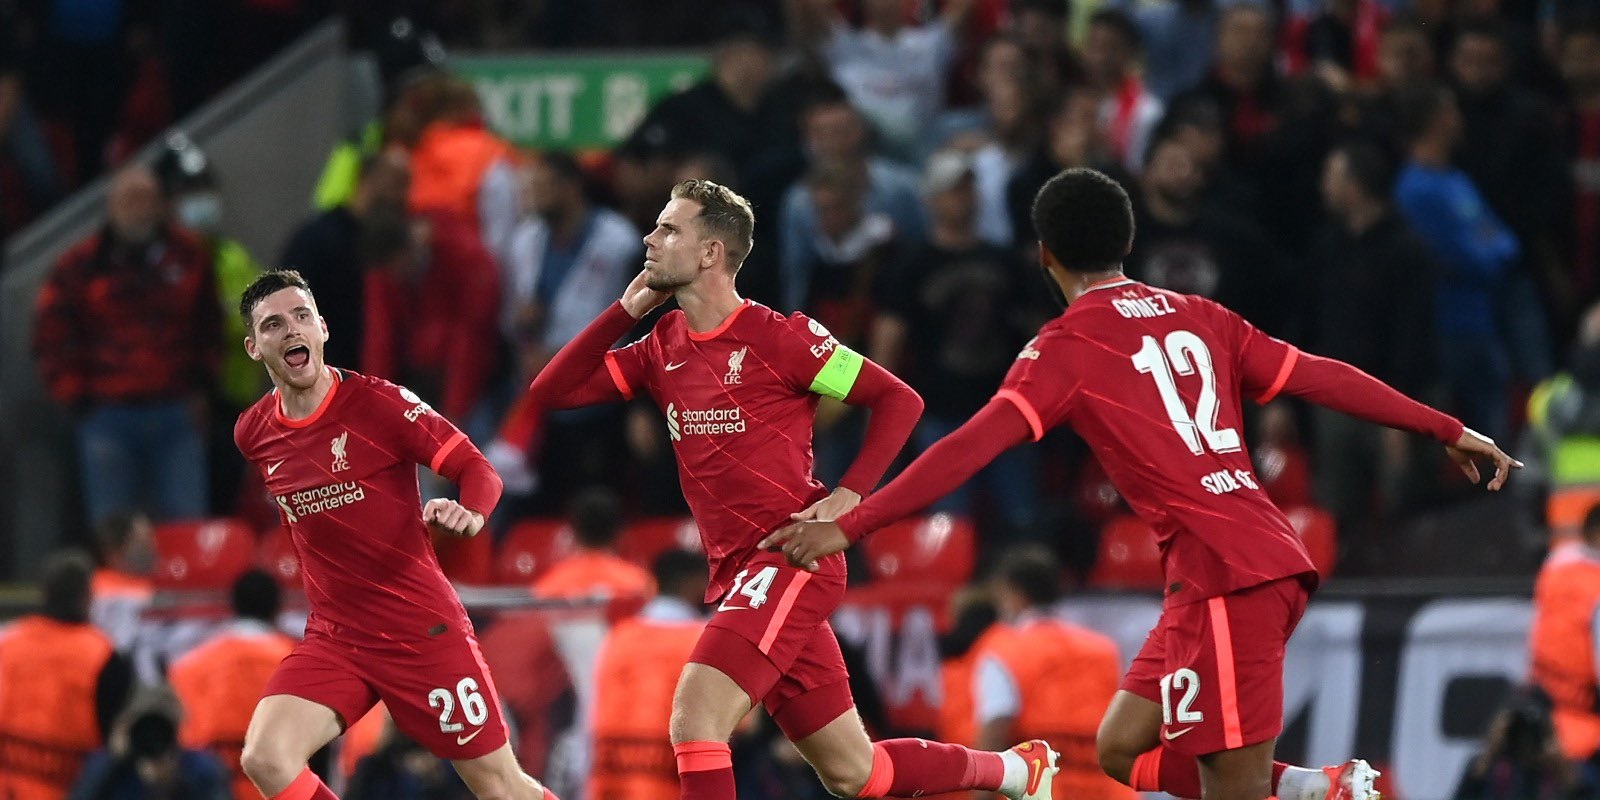 View from the Opposition: AC Milan insider issues verdict on tremendous UCL clash & one of Liverpool’s ‘biggest weapons’